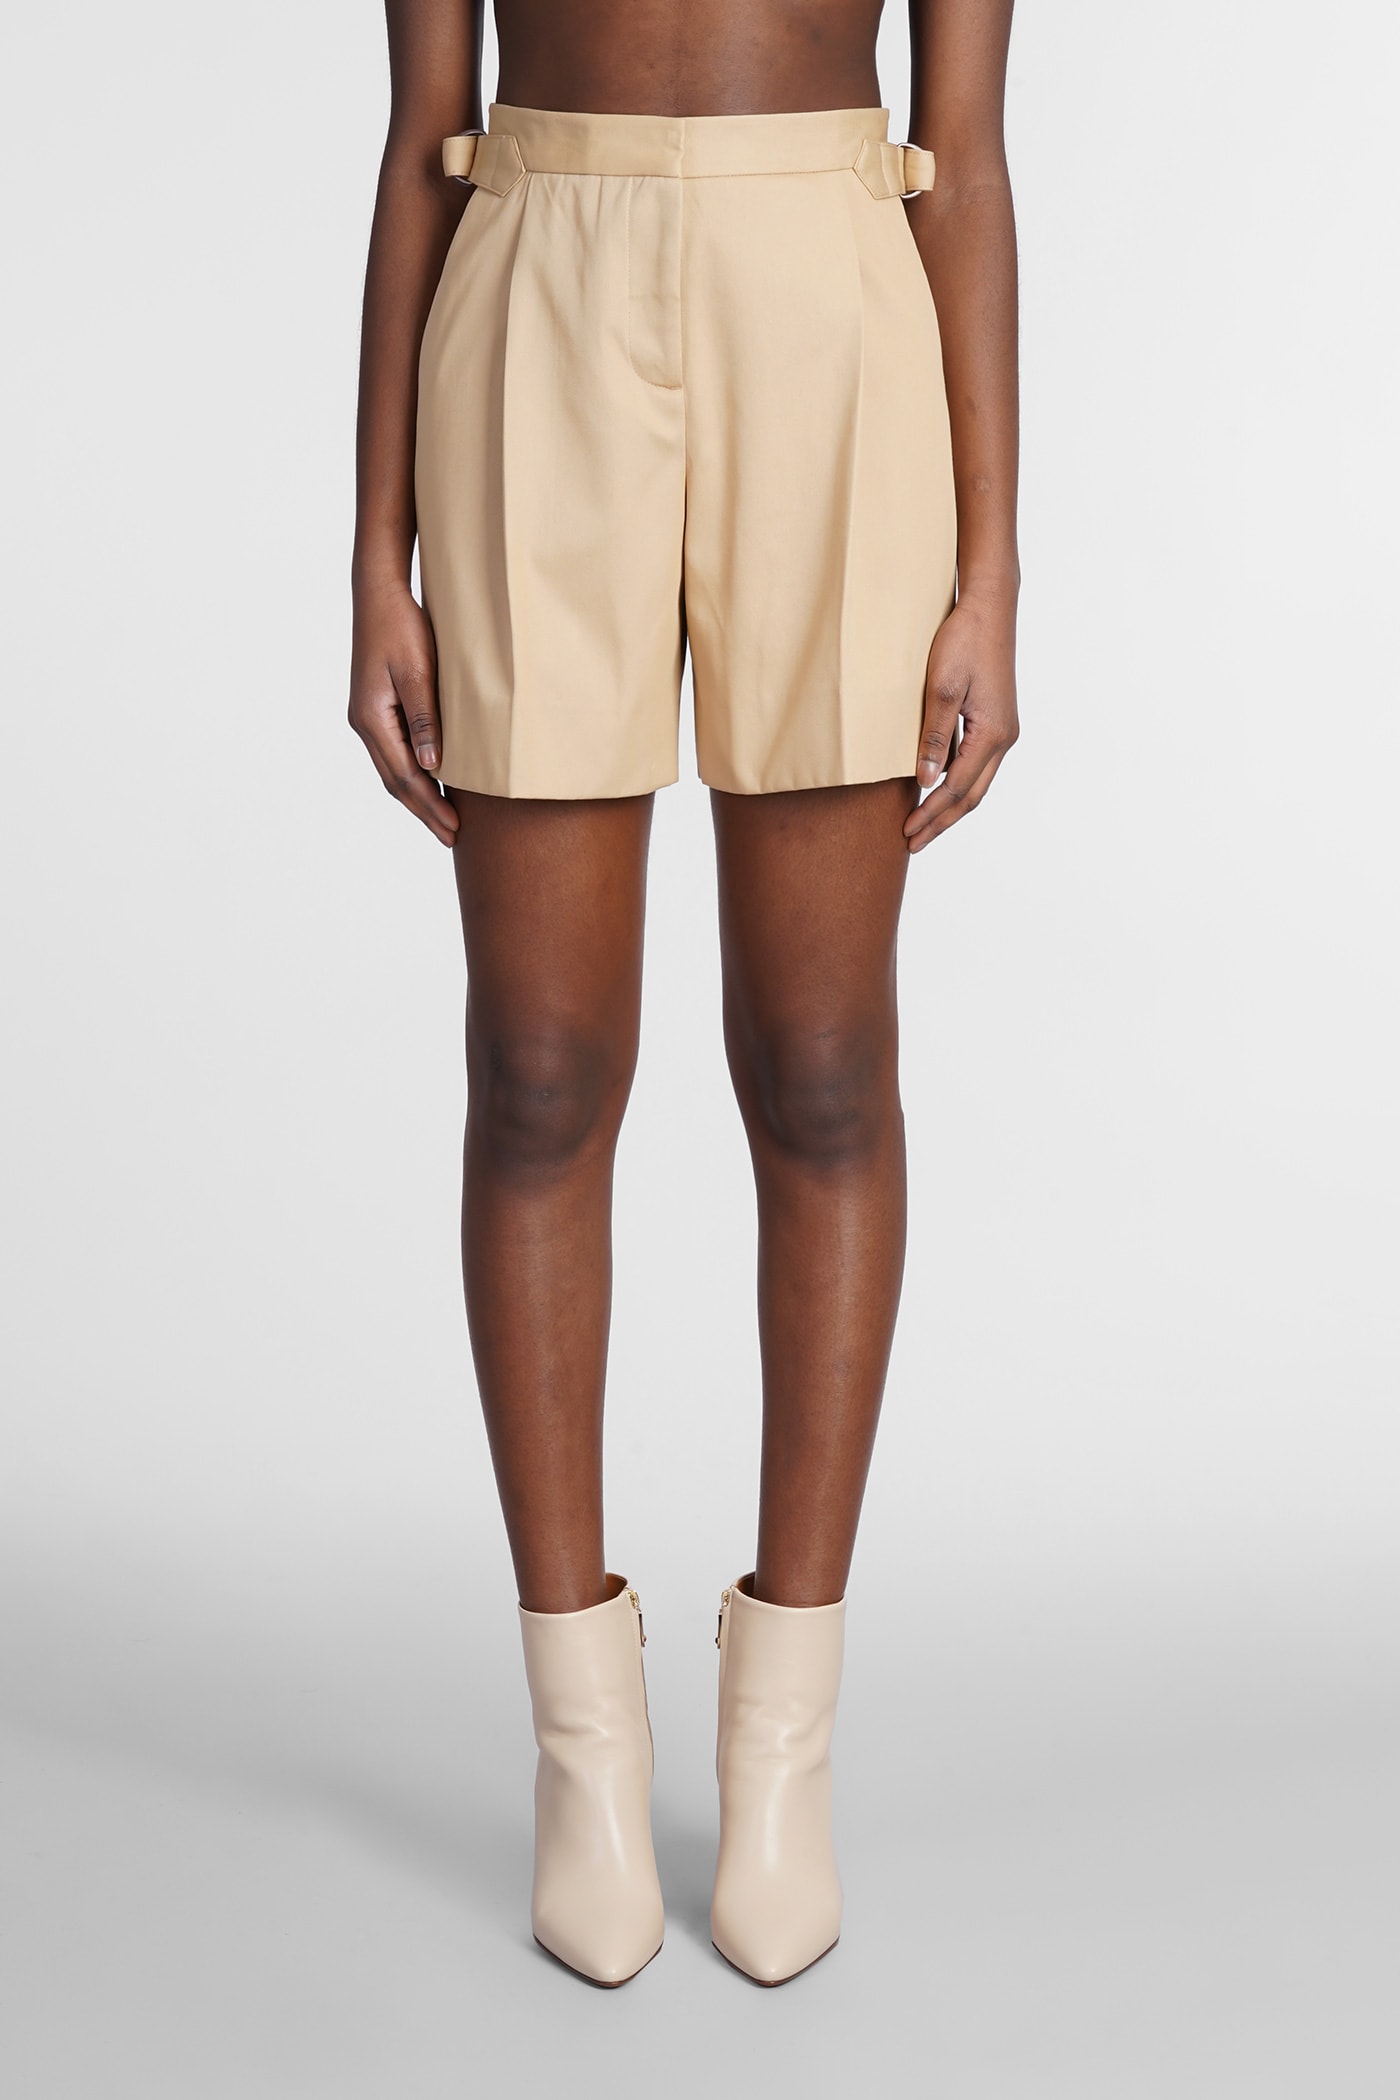 SEE BY CHLOÉ SHORTS IN BEIGE COTTON